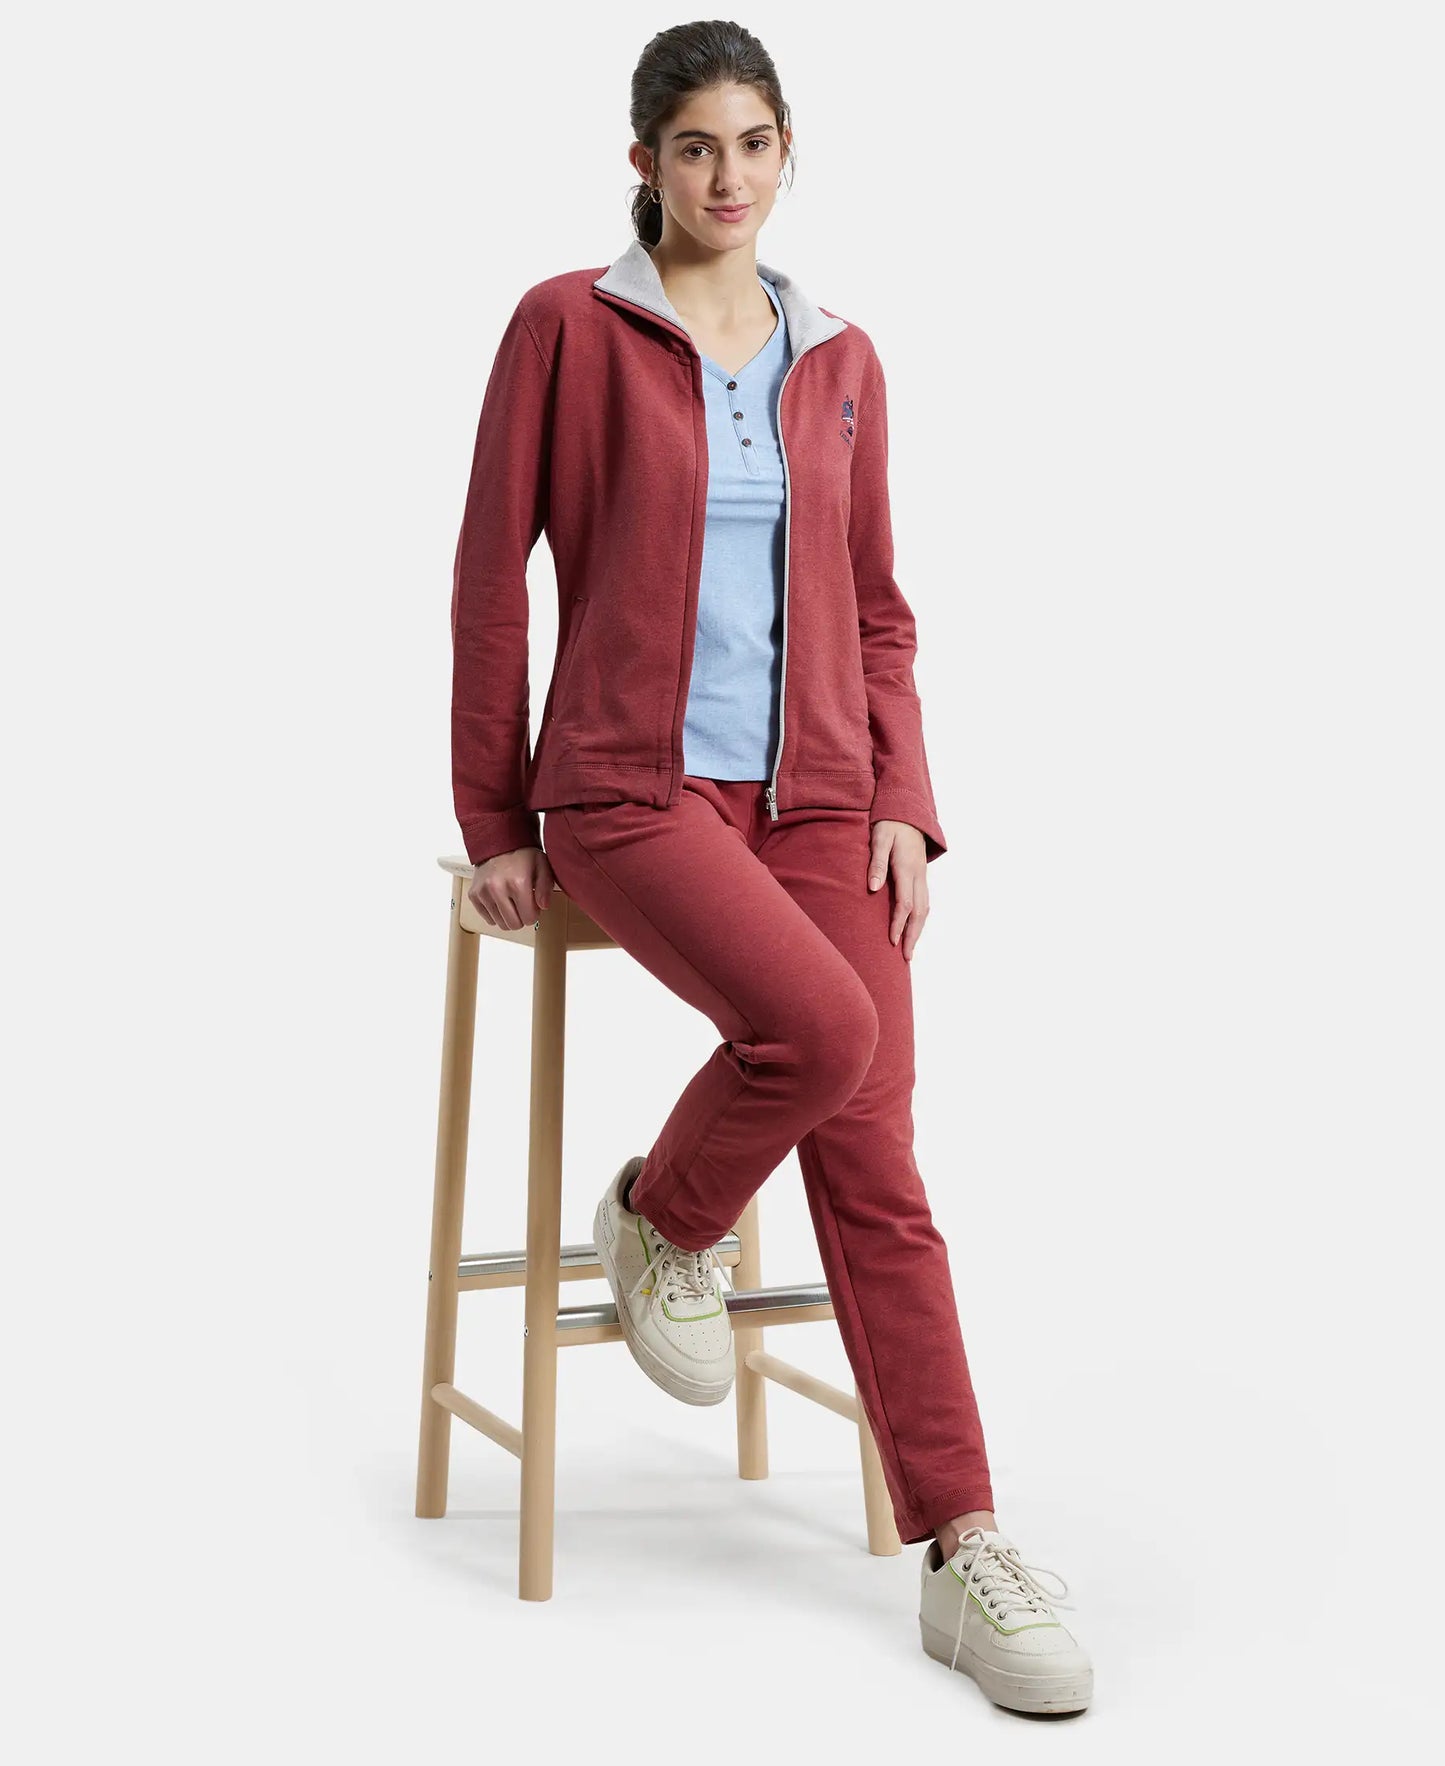 Super Combed Cotton Elastane Stretch Full Zip High Neck Jacket With Convenient Front Pockets - Rust Red Melange-6